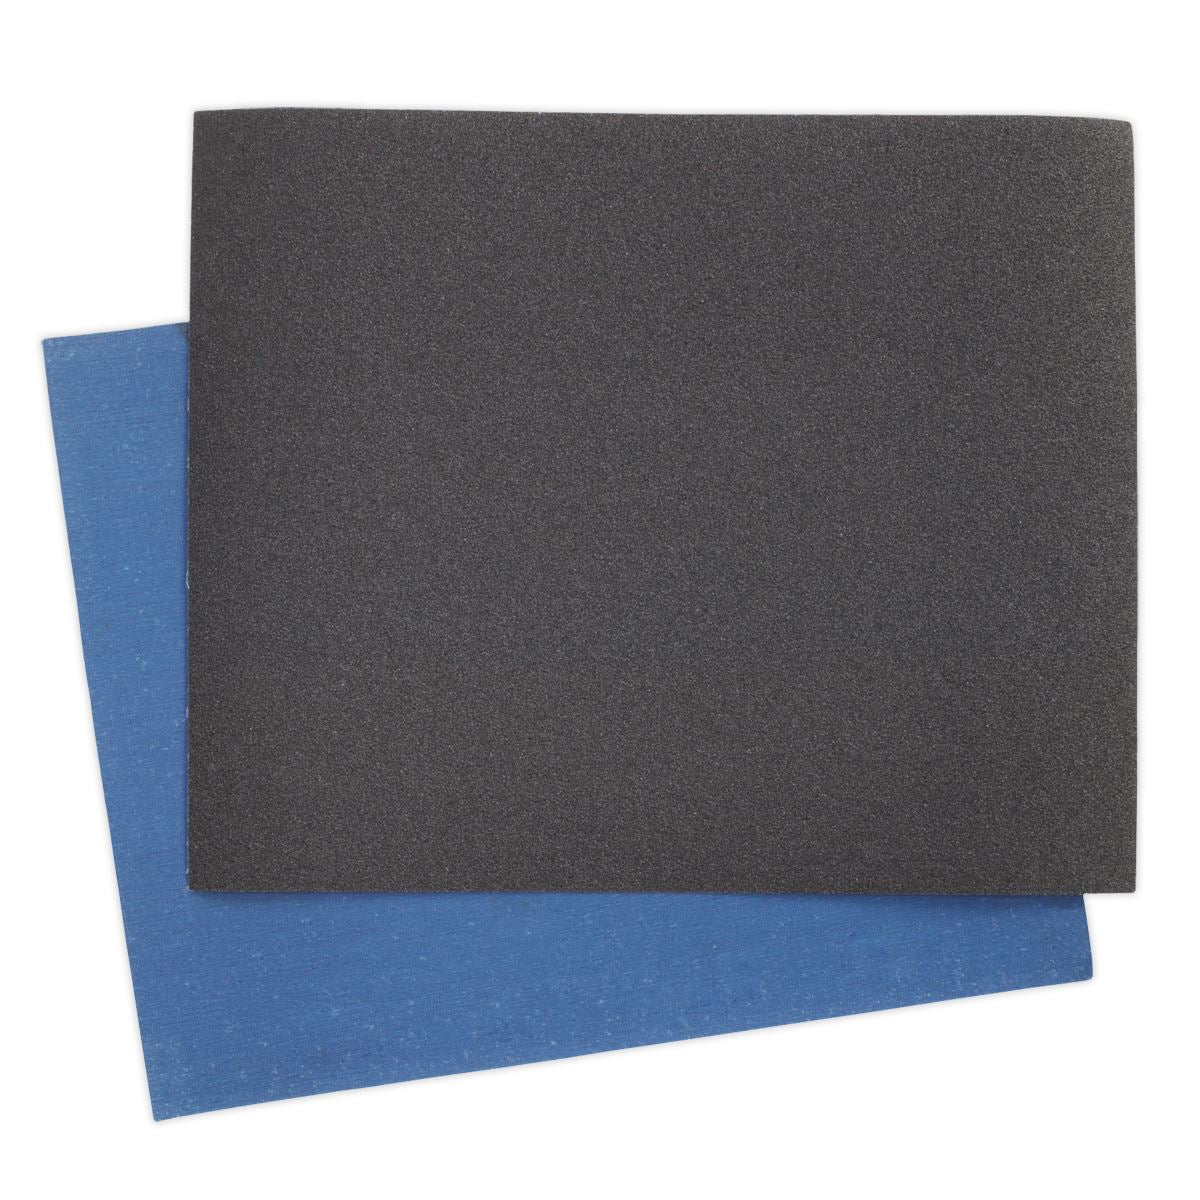 Sealey Emery Sheet Blue Twill 230 x 280mm 60Grit Pack of 25